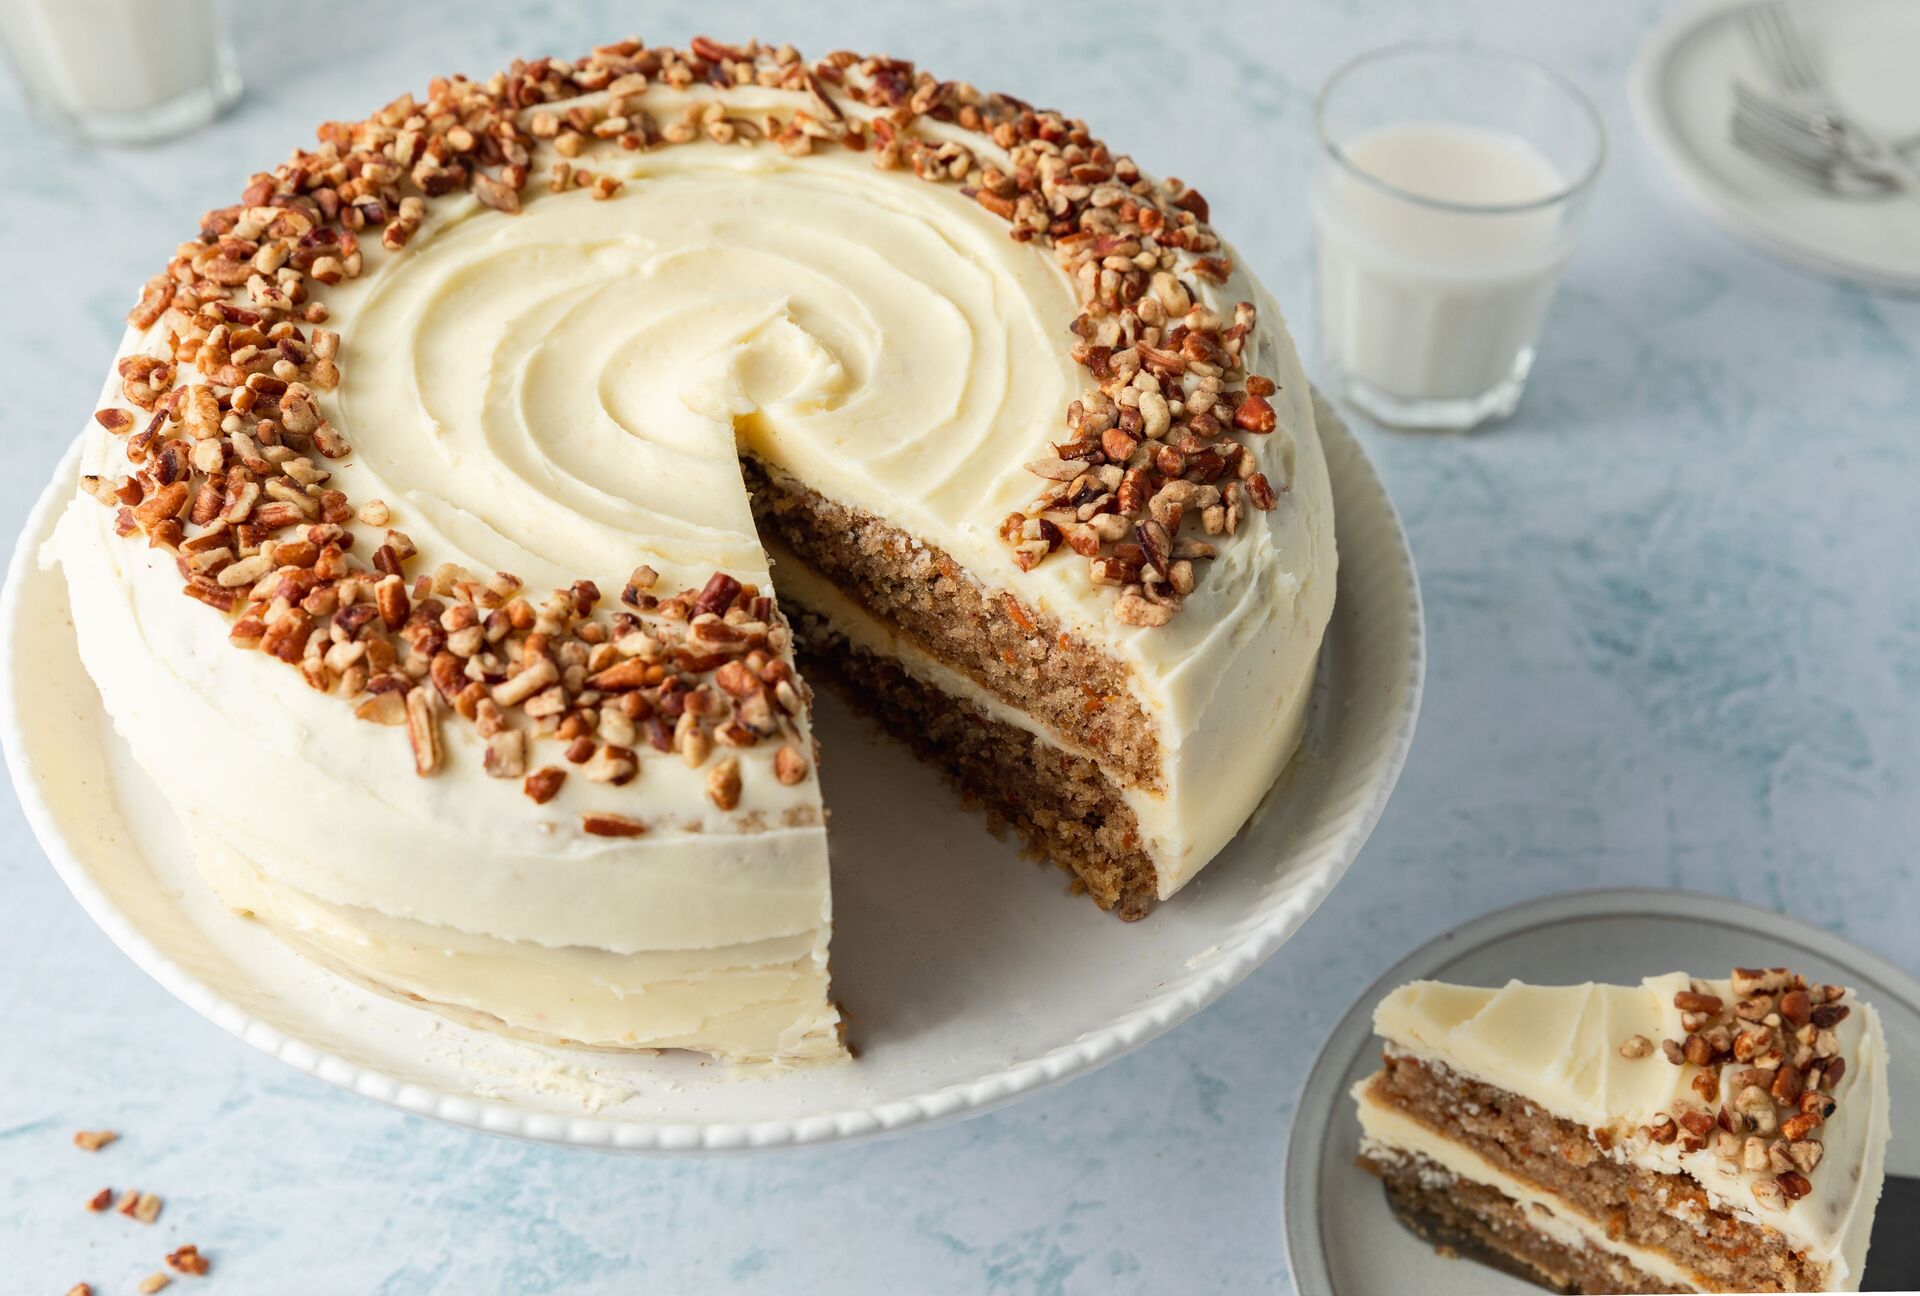 How To Store Cake With Cream Cheese Frosting